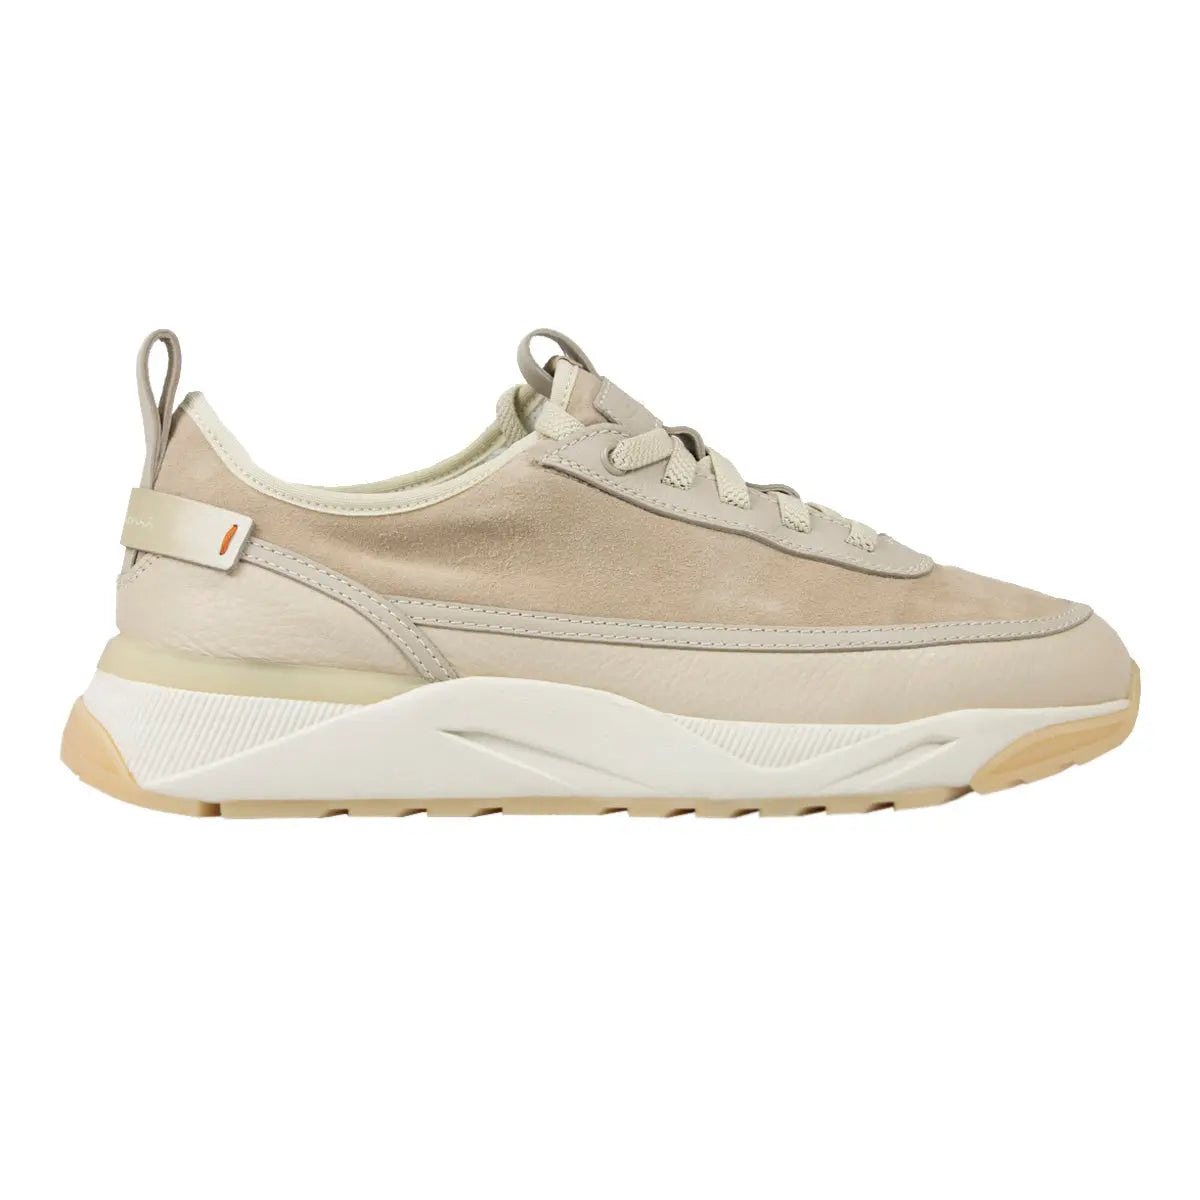 Beige Tumbled Leather and Suede Sneaker  Santoni   